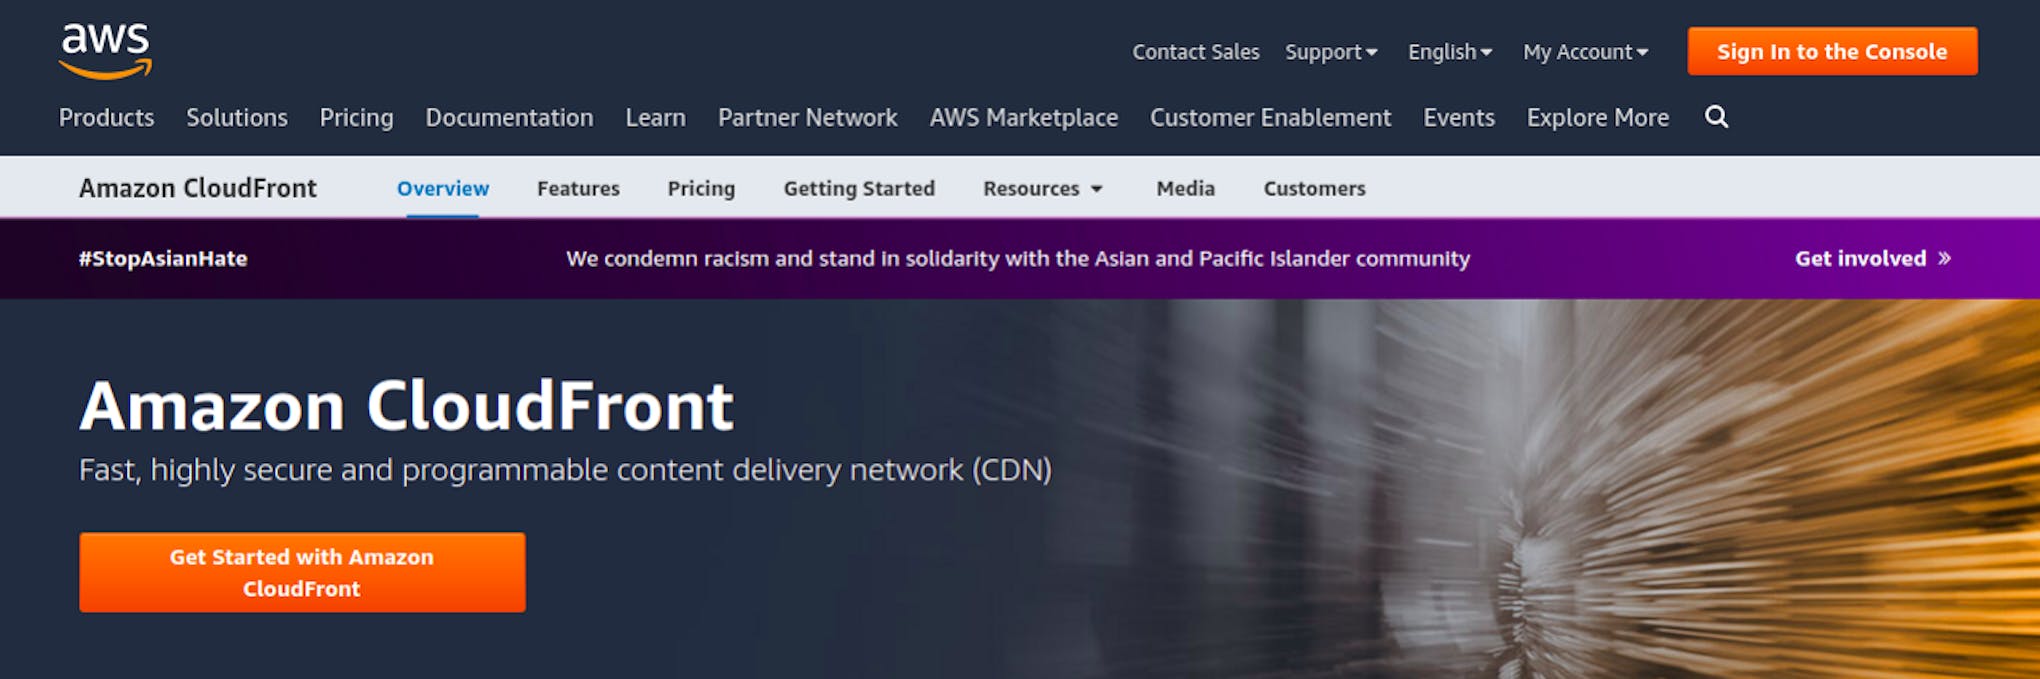 Amazon CloudFront Page.